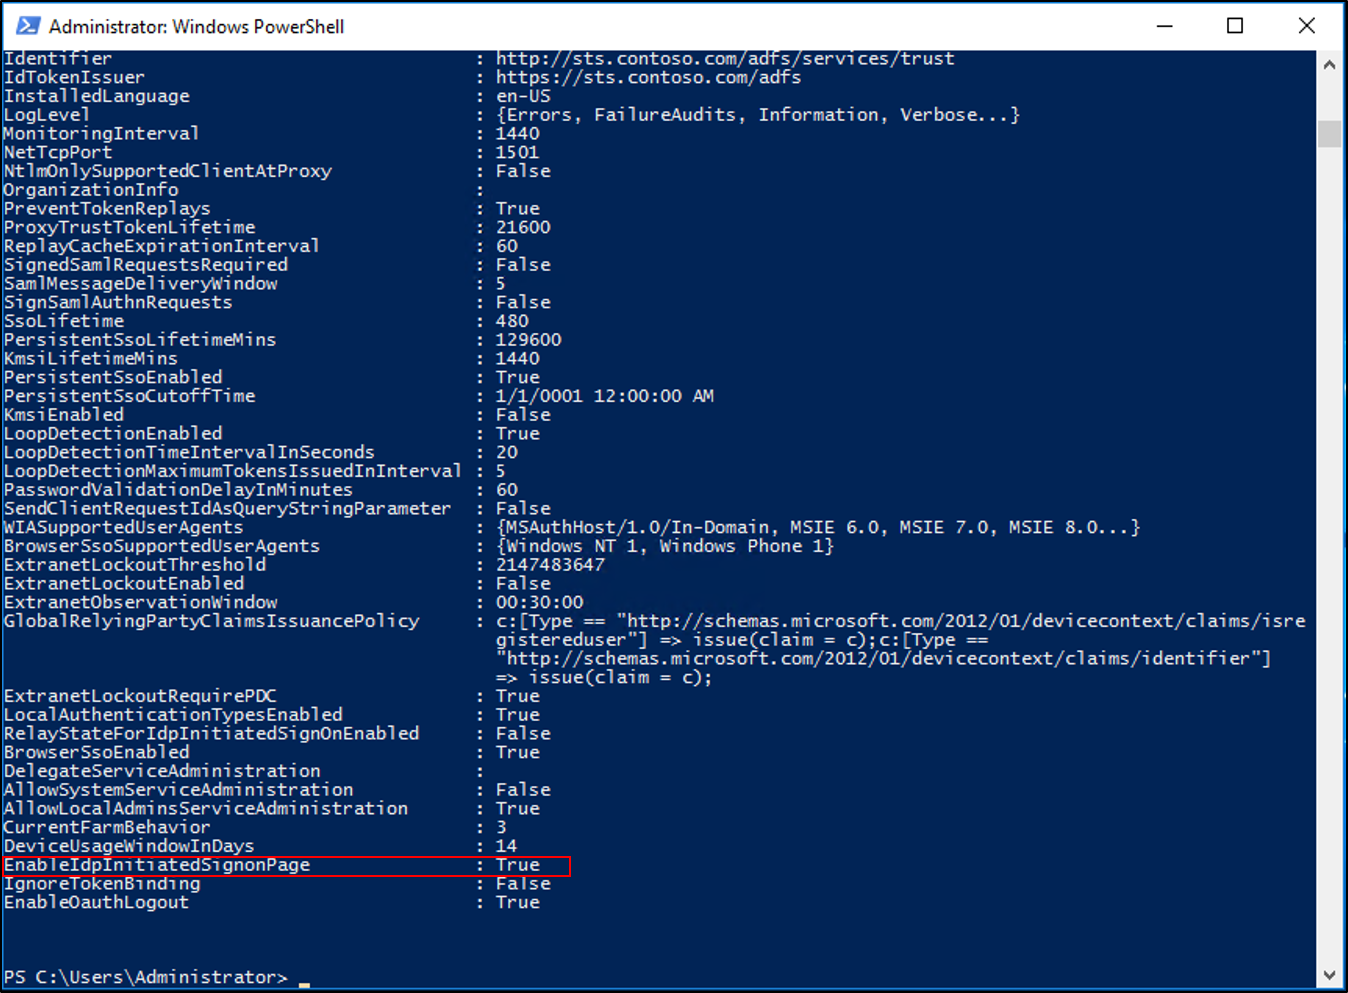 Screenshot PowerShell output highlighting that the EnableIdpInitiatedSignonPage property is set to true.